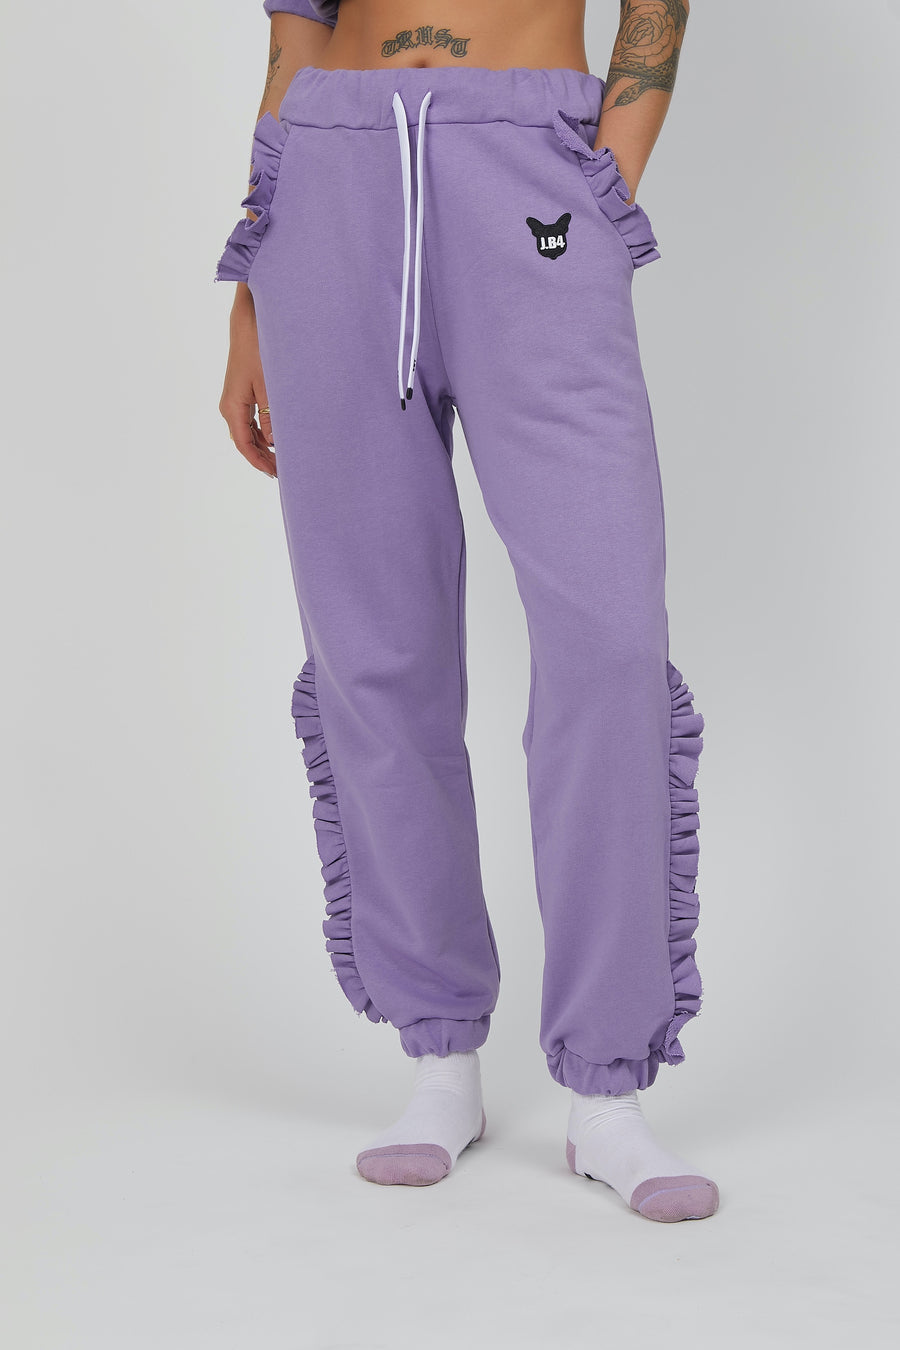 LILAC ROUCHES SWEATPANTS